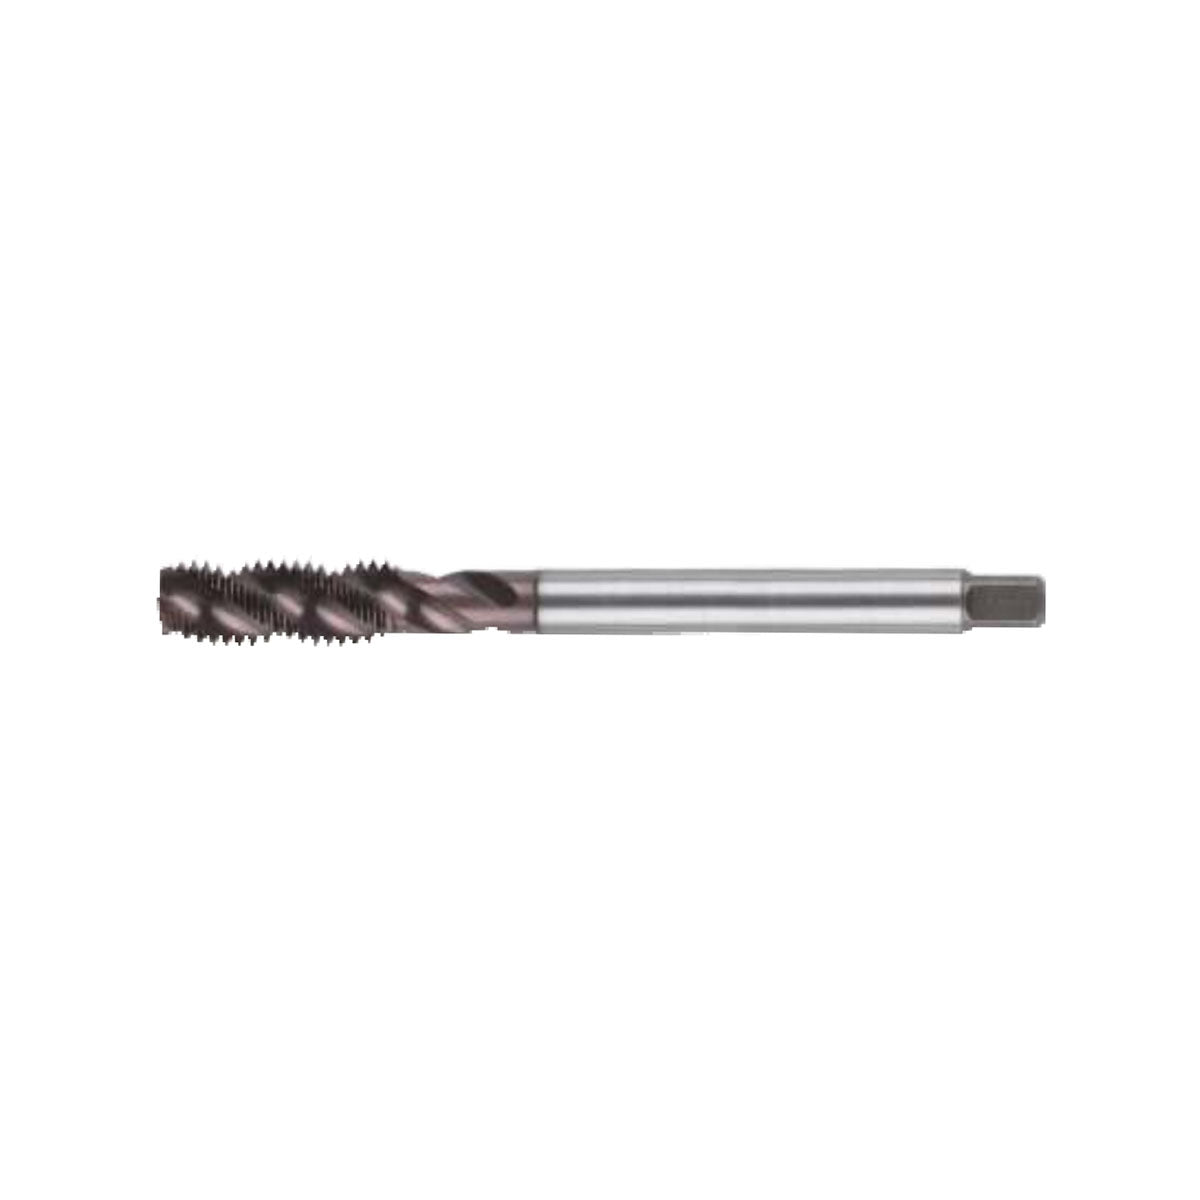 L-SFT (3/8~9/16-24UNF~11UNC) MSU3824120 SFT Spiral pointed taps with long shank - Makotools Industrial Supply Tools for Metal Cutting